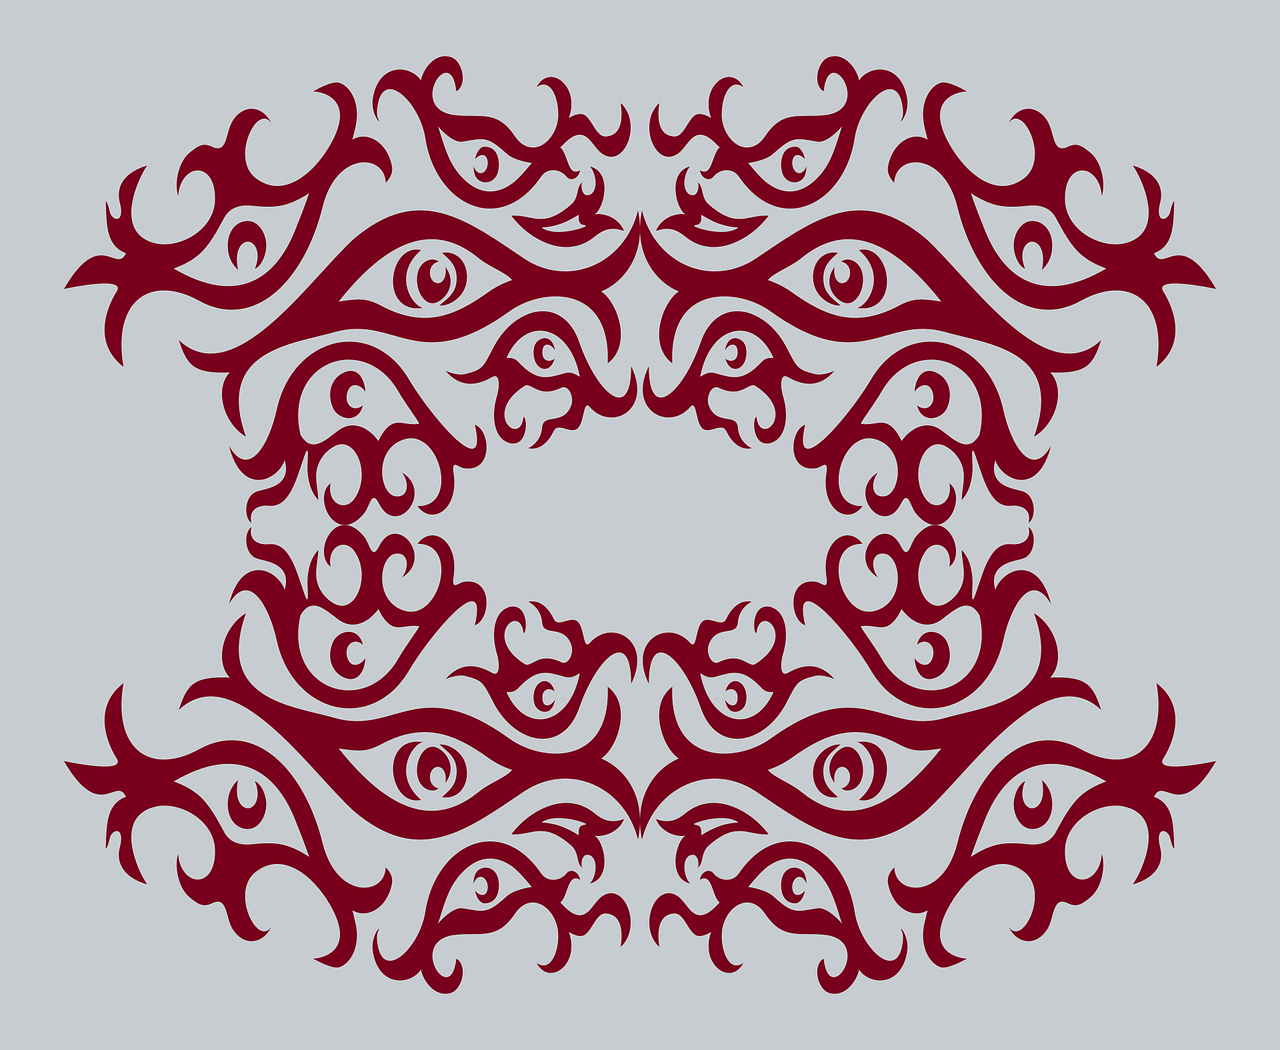 a red circular design on a gray background, a tattoo, abstract illusionism, multiple eyes, baroque frame border, oval eyes, chinoiserie pattern